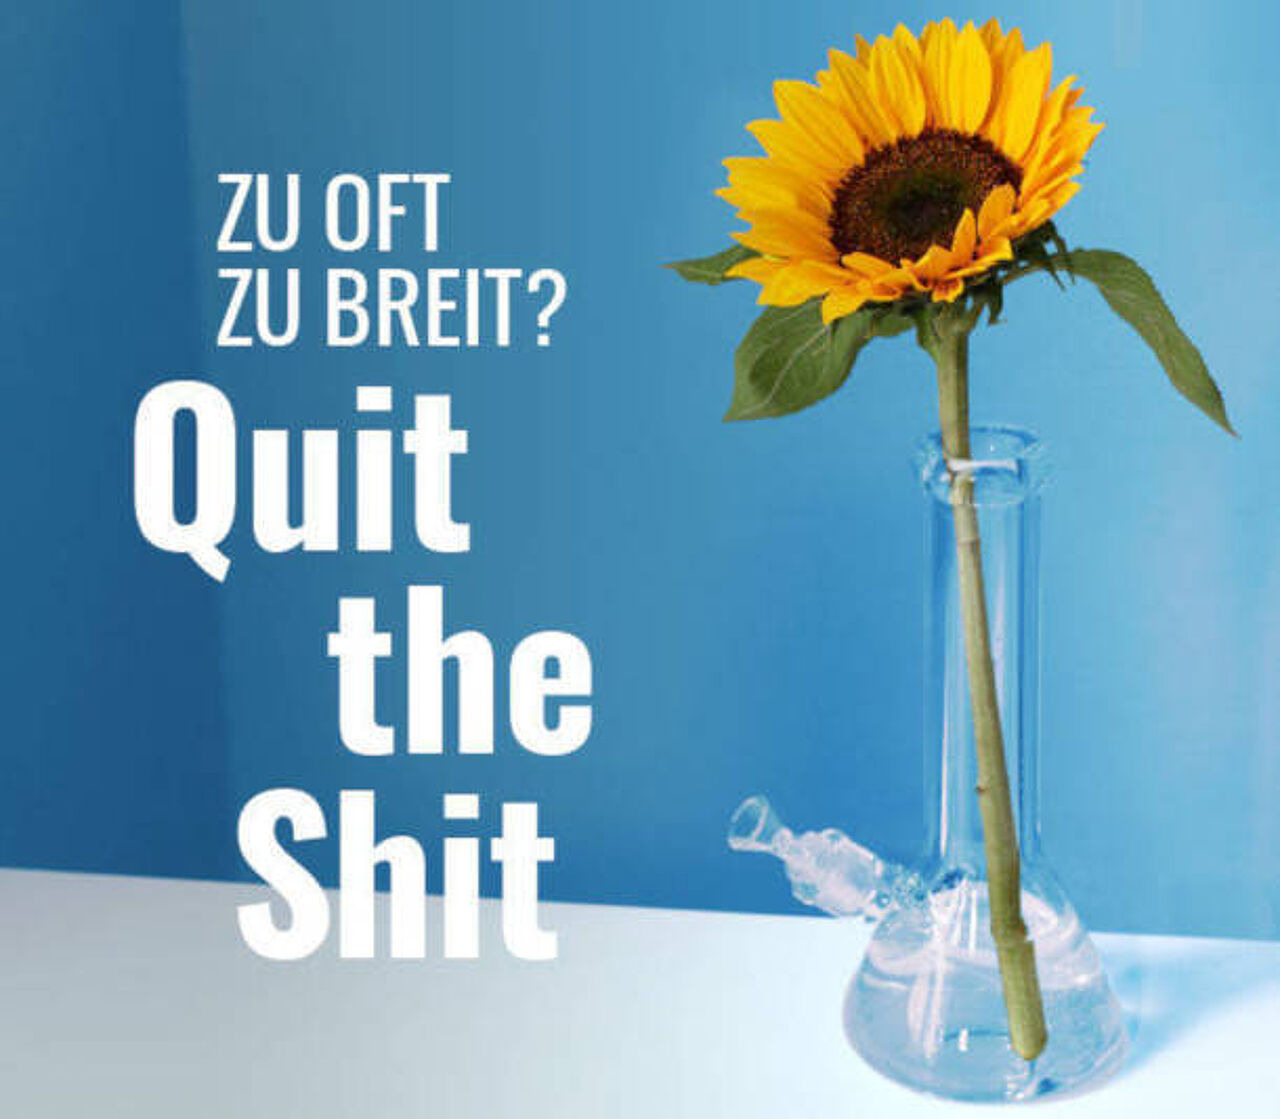 Quit-the-shit_GS_Thema_Cannabis